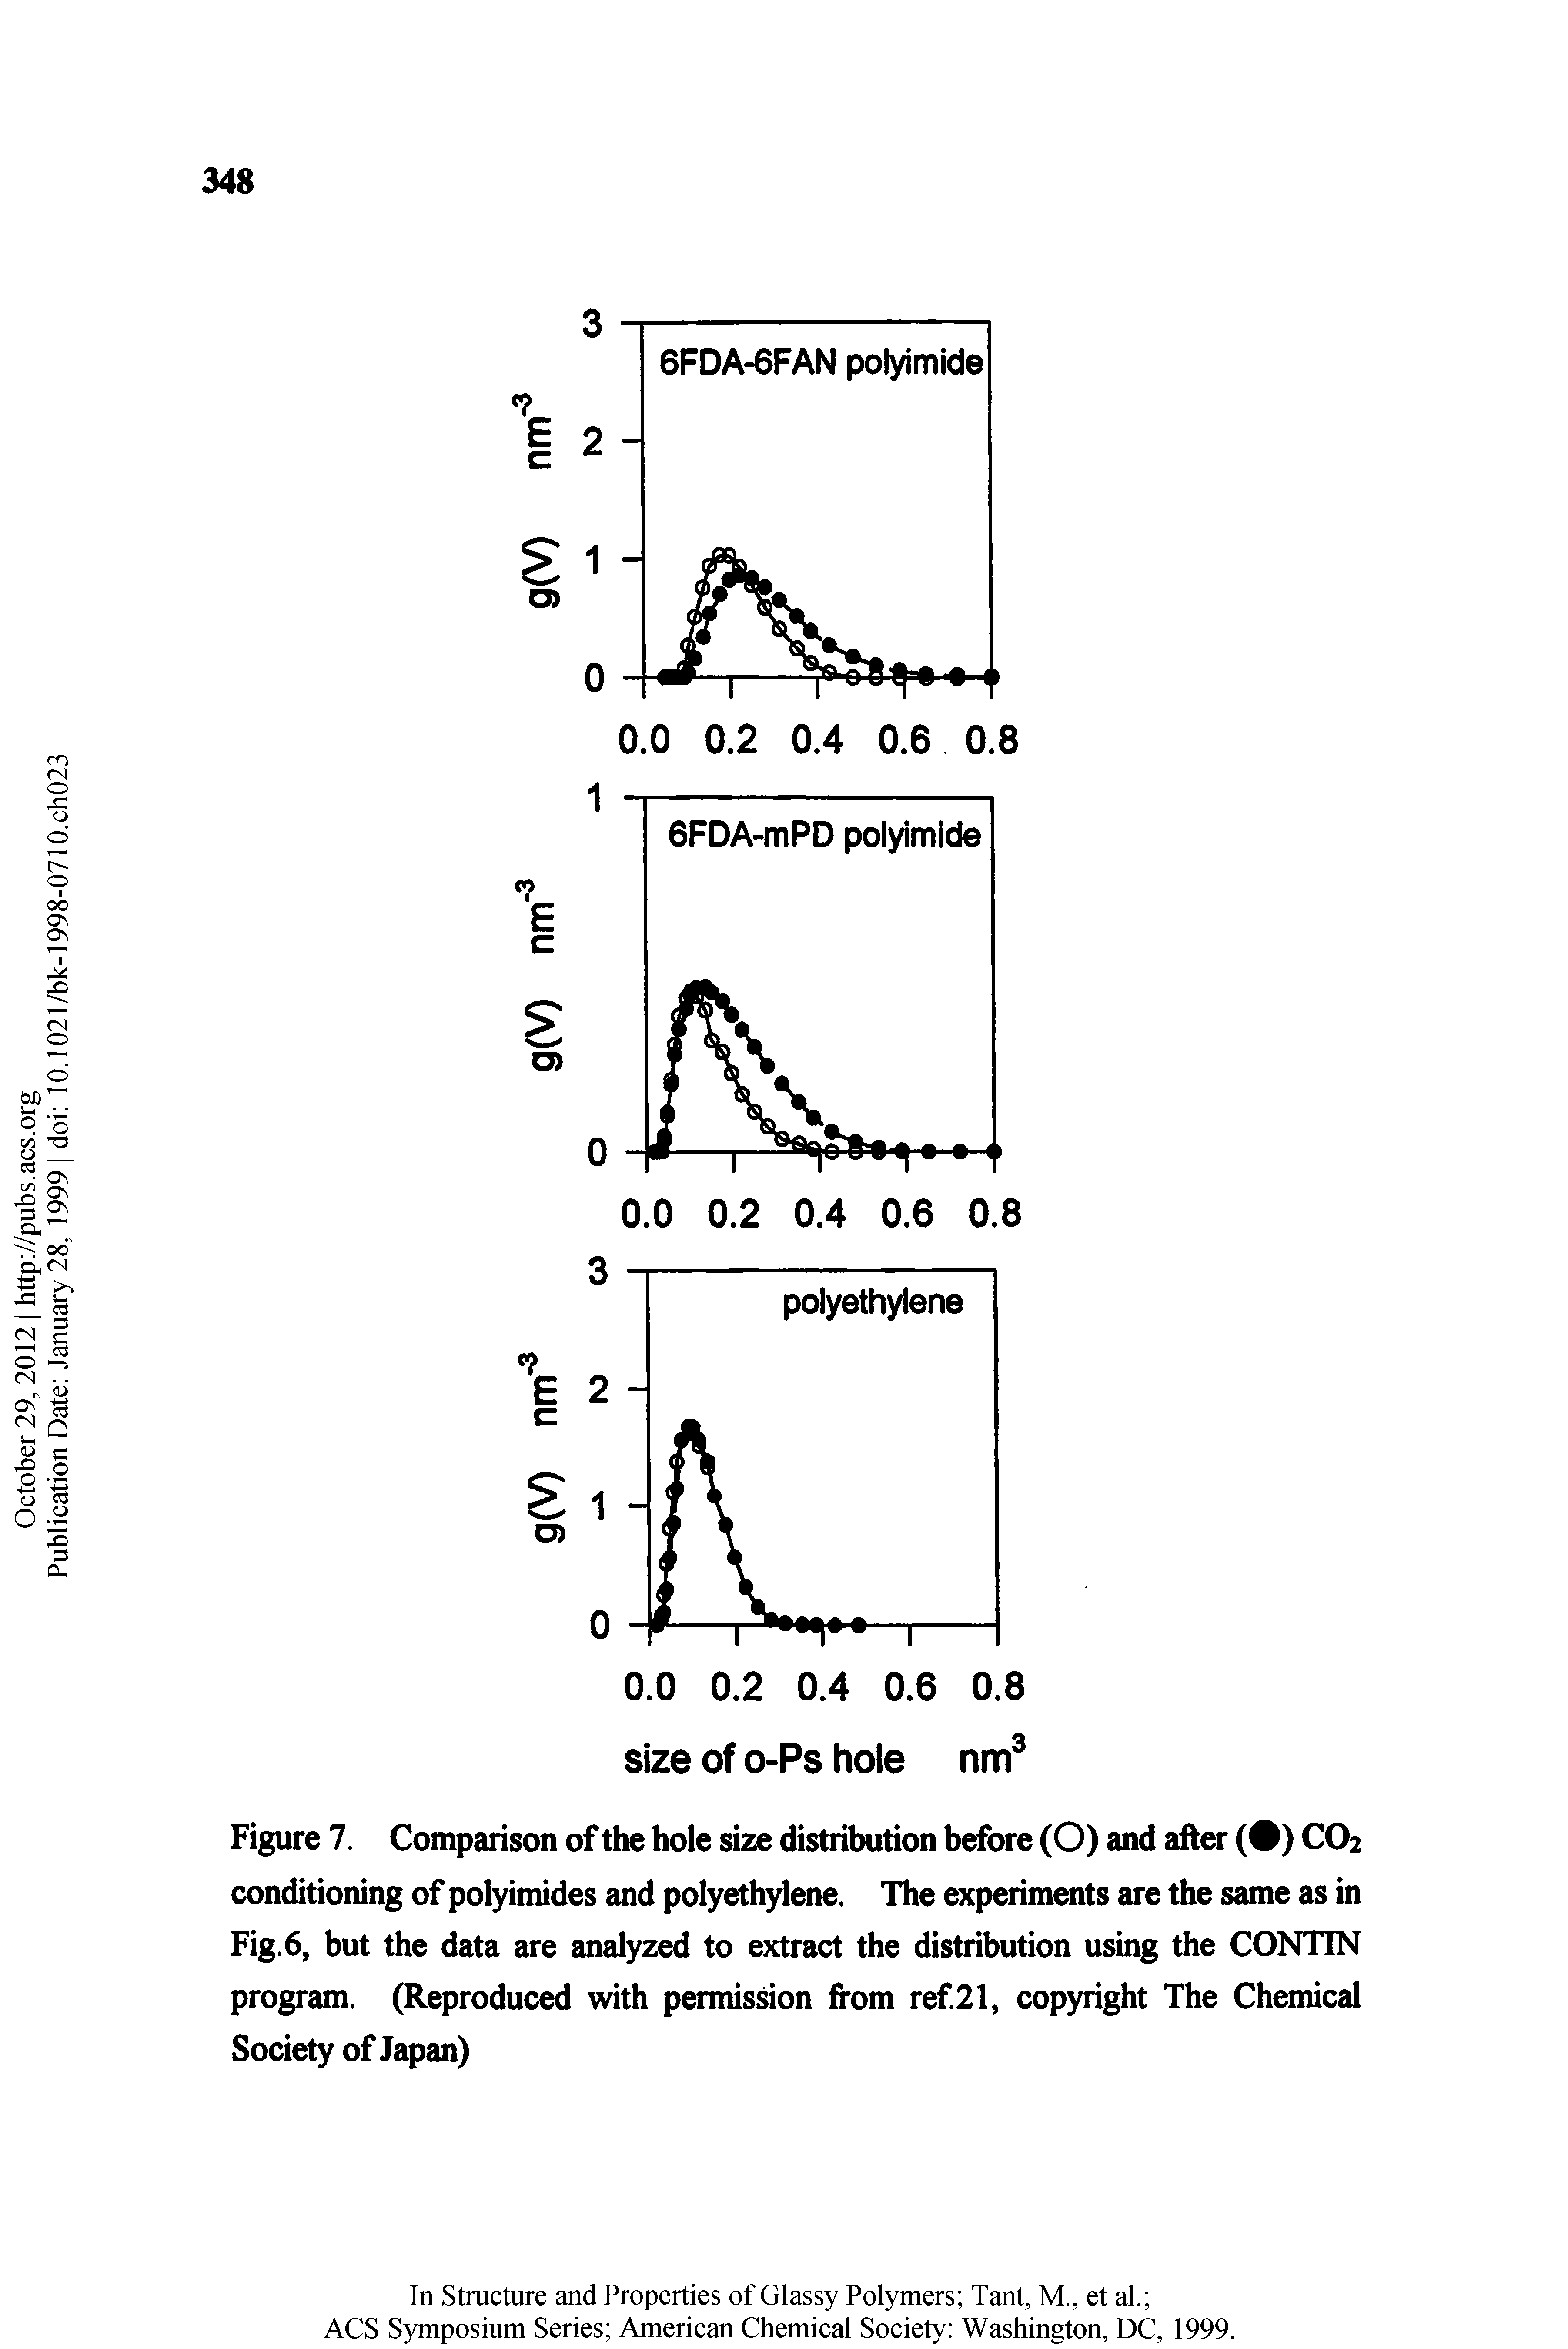 Figure 7. Comparison of the hole size distribution before (O) and after ( ) CO2 conditioning of polyimides and polyethylene. The experiments are the same as in Fig.6, but the data are analyzed to extract the distribution using the CONTIN program. (Reproduced with permission from ref 21, copyright The Chemical Society of Japan)...